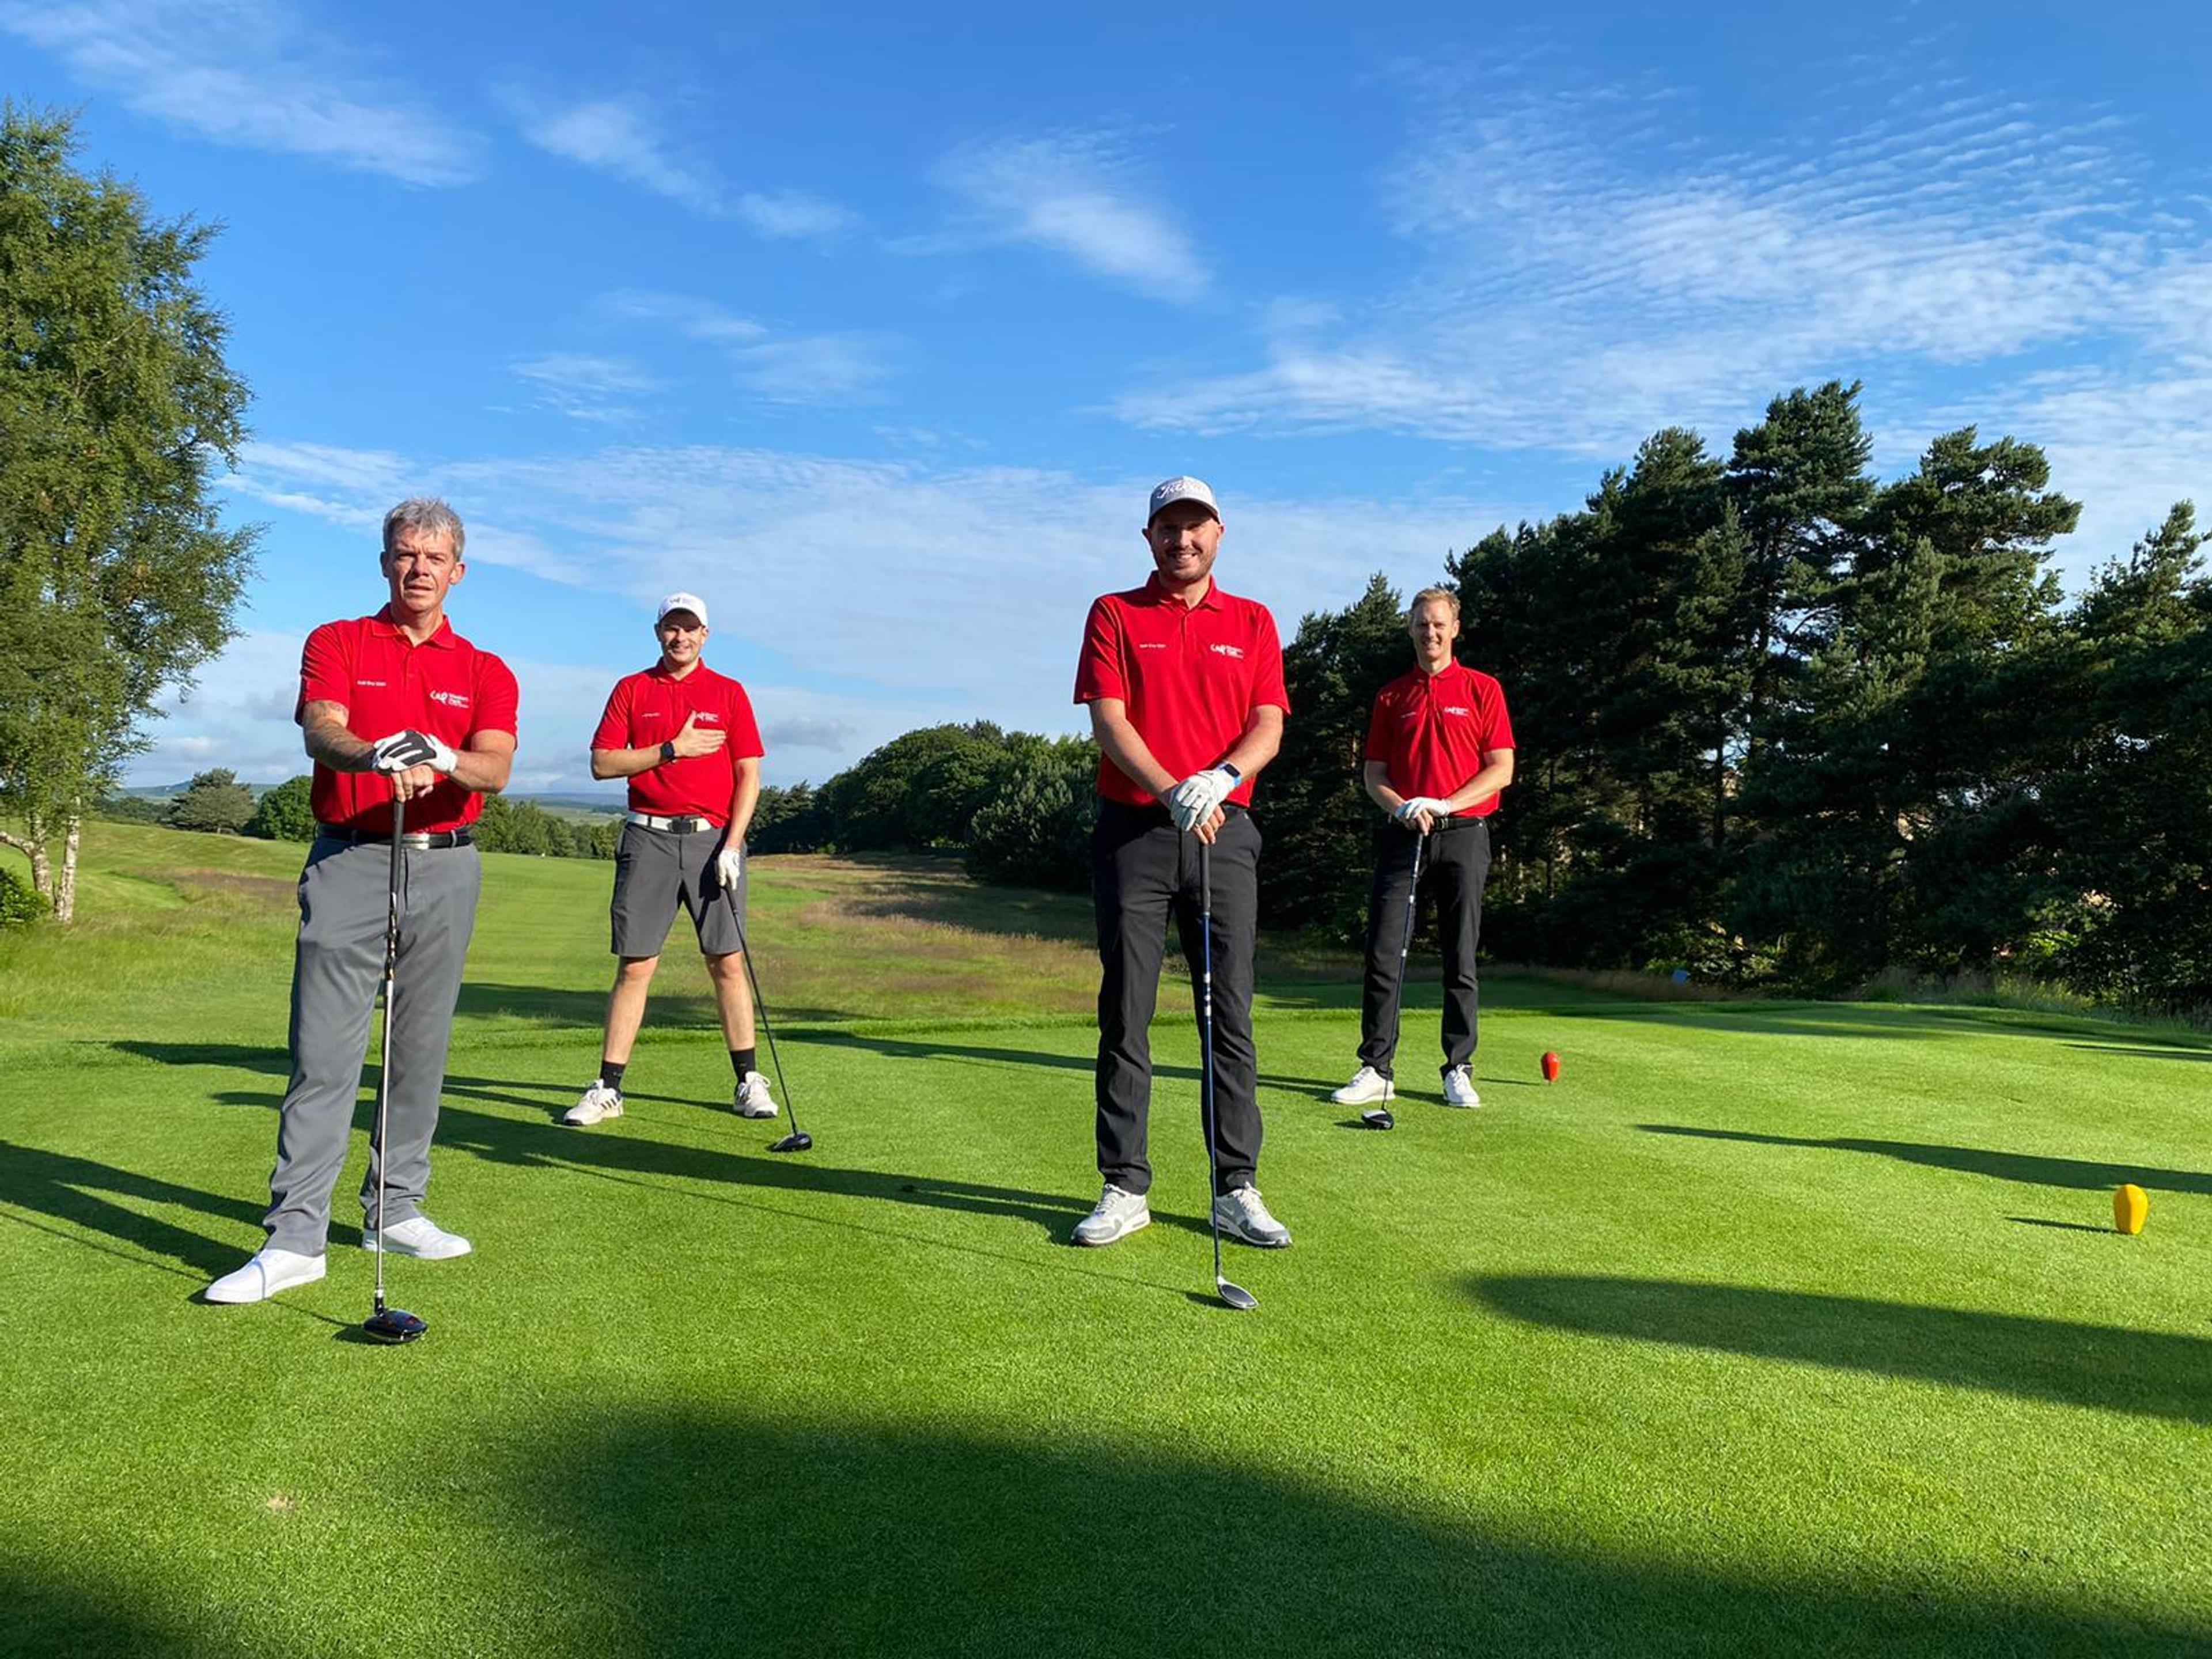 A group of four male golfers stood socially distanced holding golf clubs at Hallamshire golf course